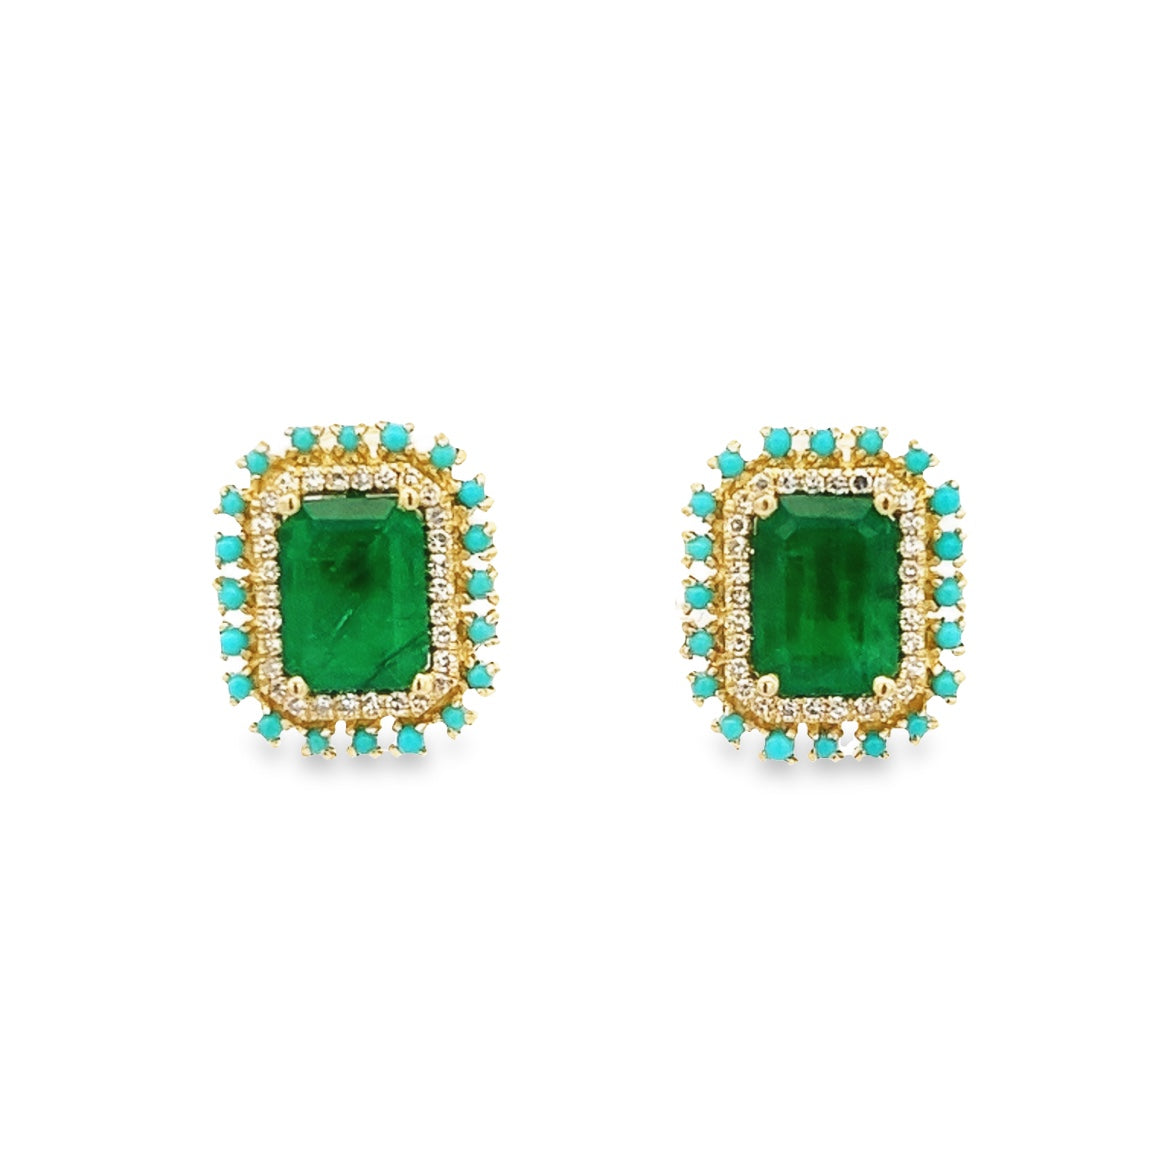 14K GOLD EMERALD TURQUOISE AND DIAMONDS EARRINGS